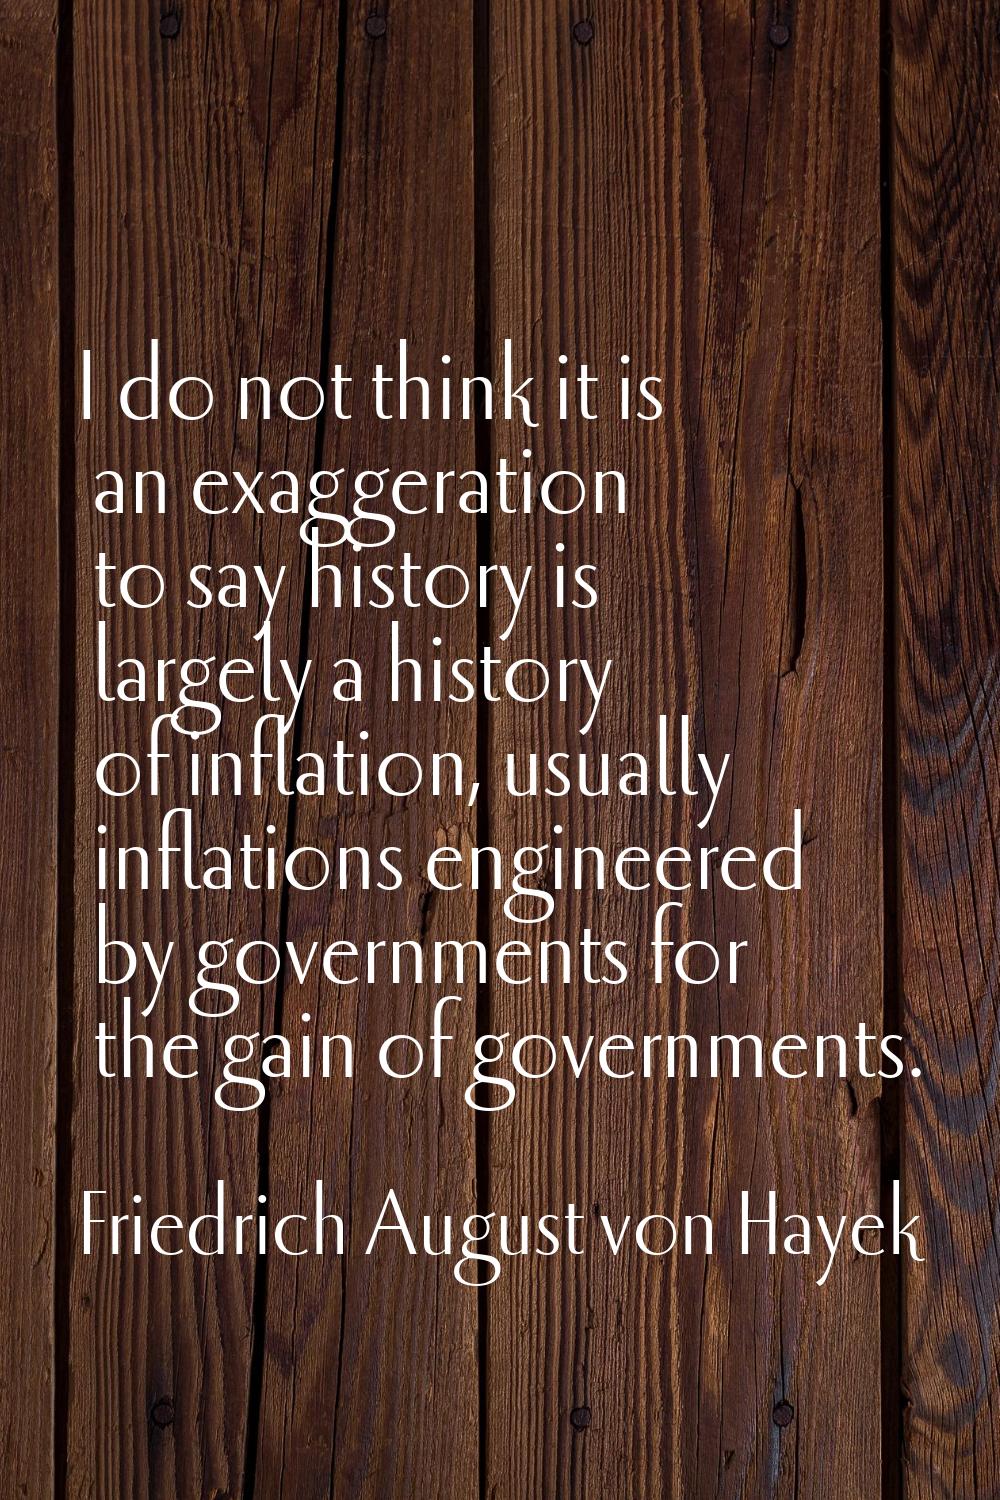 I do not think it is an exaggeration to say history is largely a history of inflation, usually infl